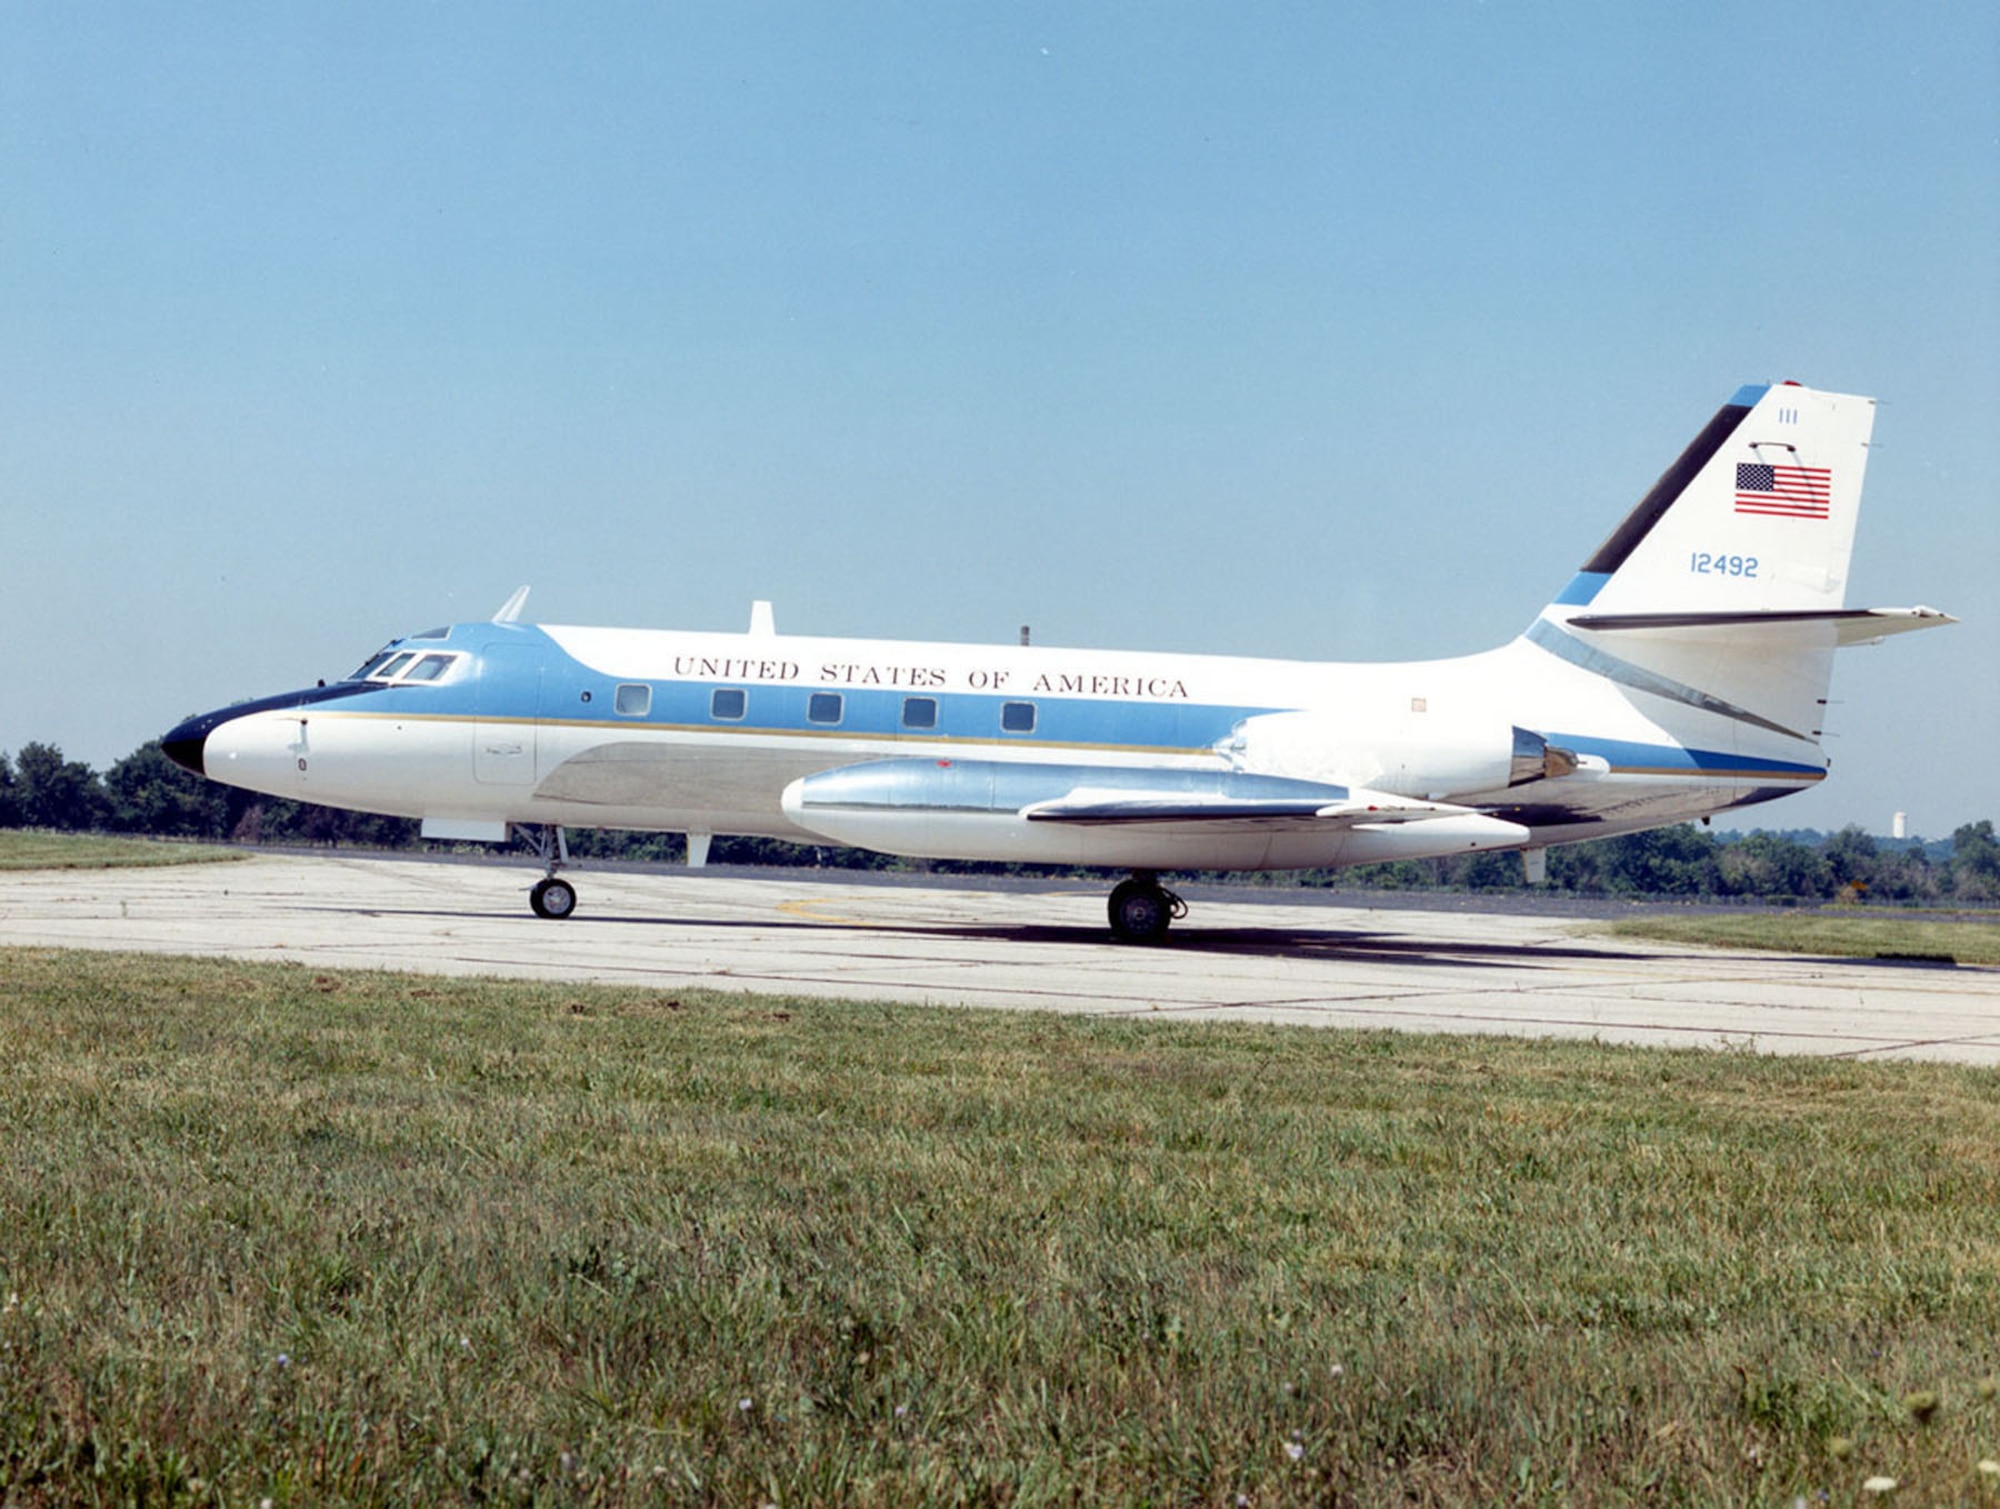 DAYTON, Ohio -- Lockheed VC-140B Jetstar at the National Museum of the United States Air Force. (U.S. Air Force photo)